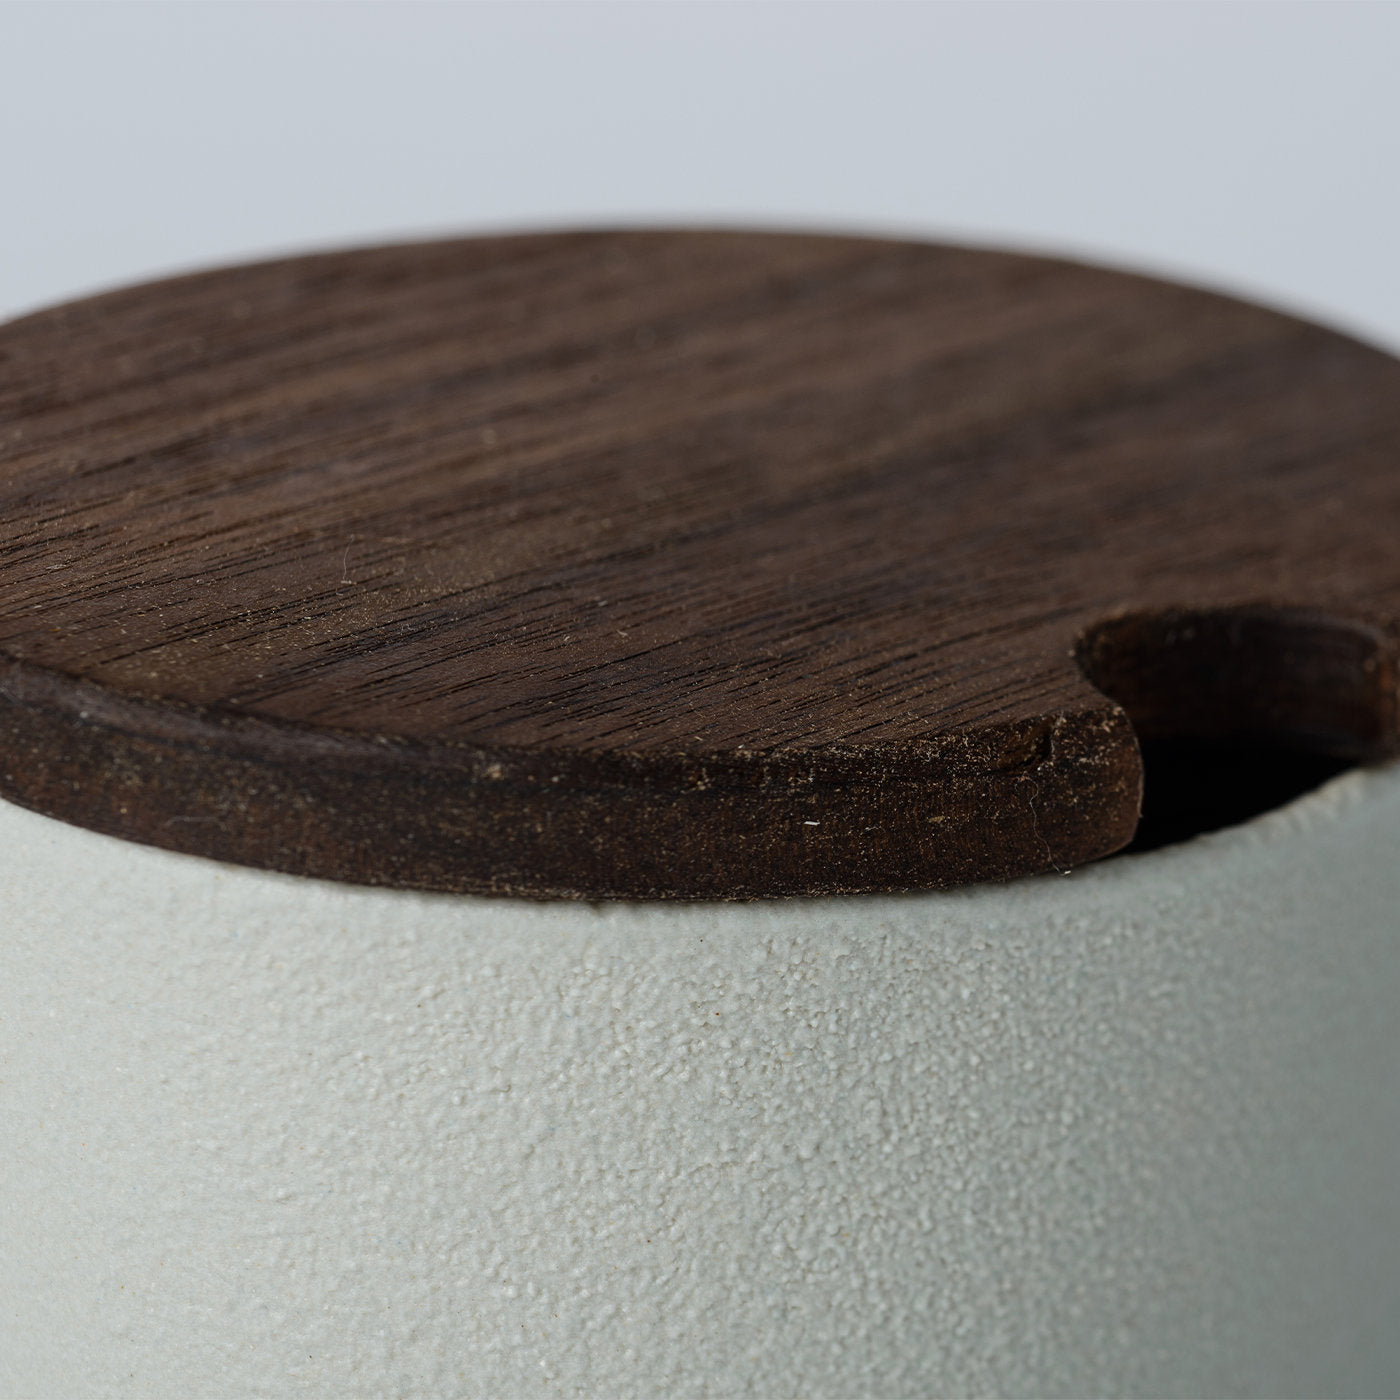 Ceramic Sugar Bowl with Wooden Lid and Small Ceramic Cups - Alternative view 1